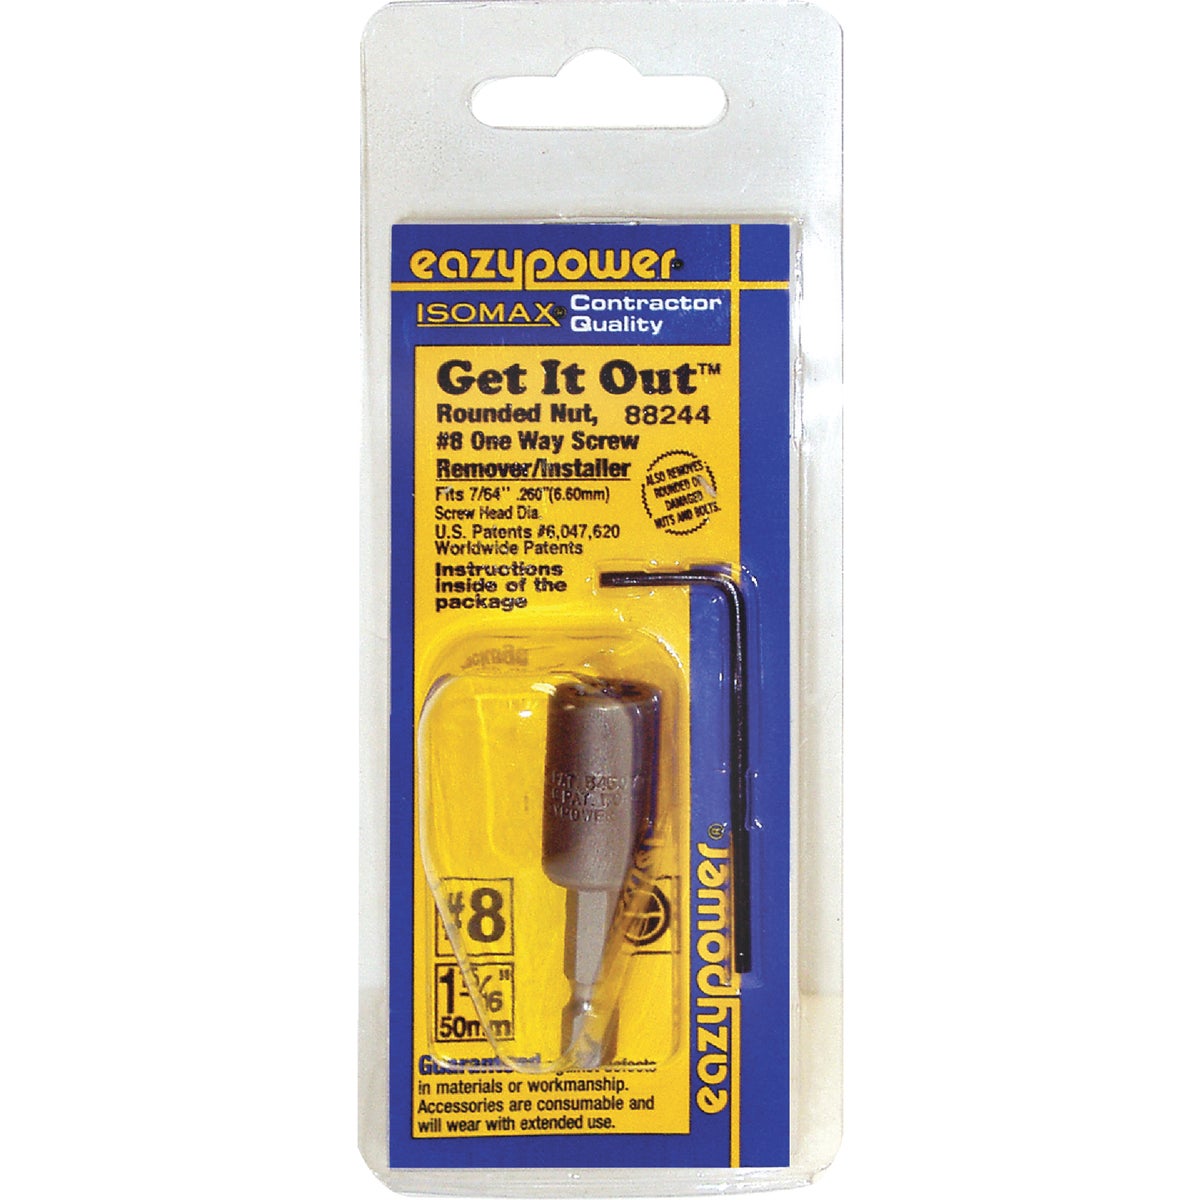 Item 325026, One way screw remover/installer ideal for removing rounded or damaged nuts 